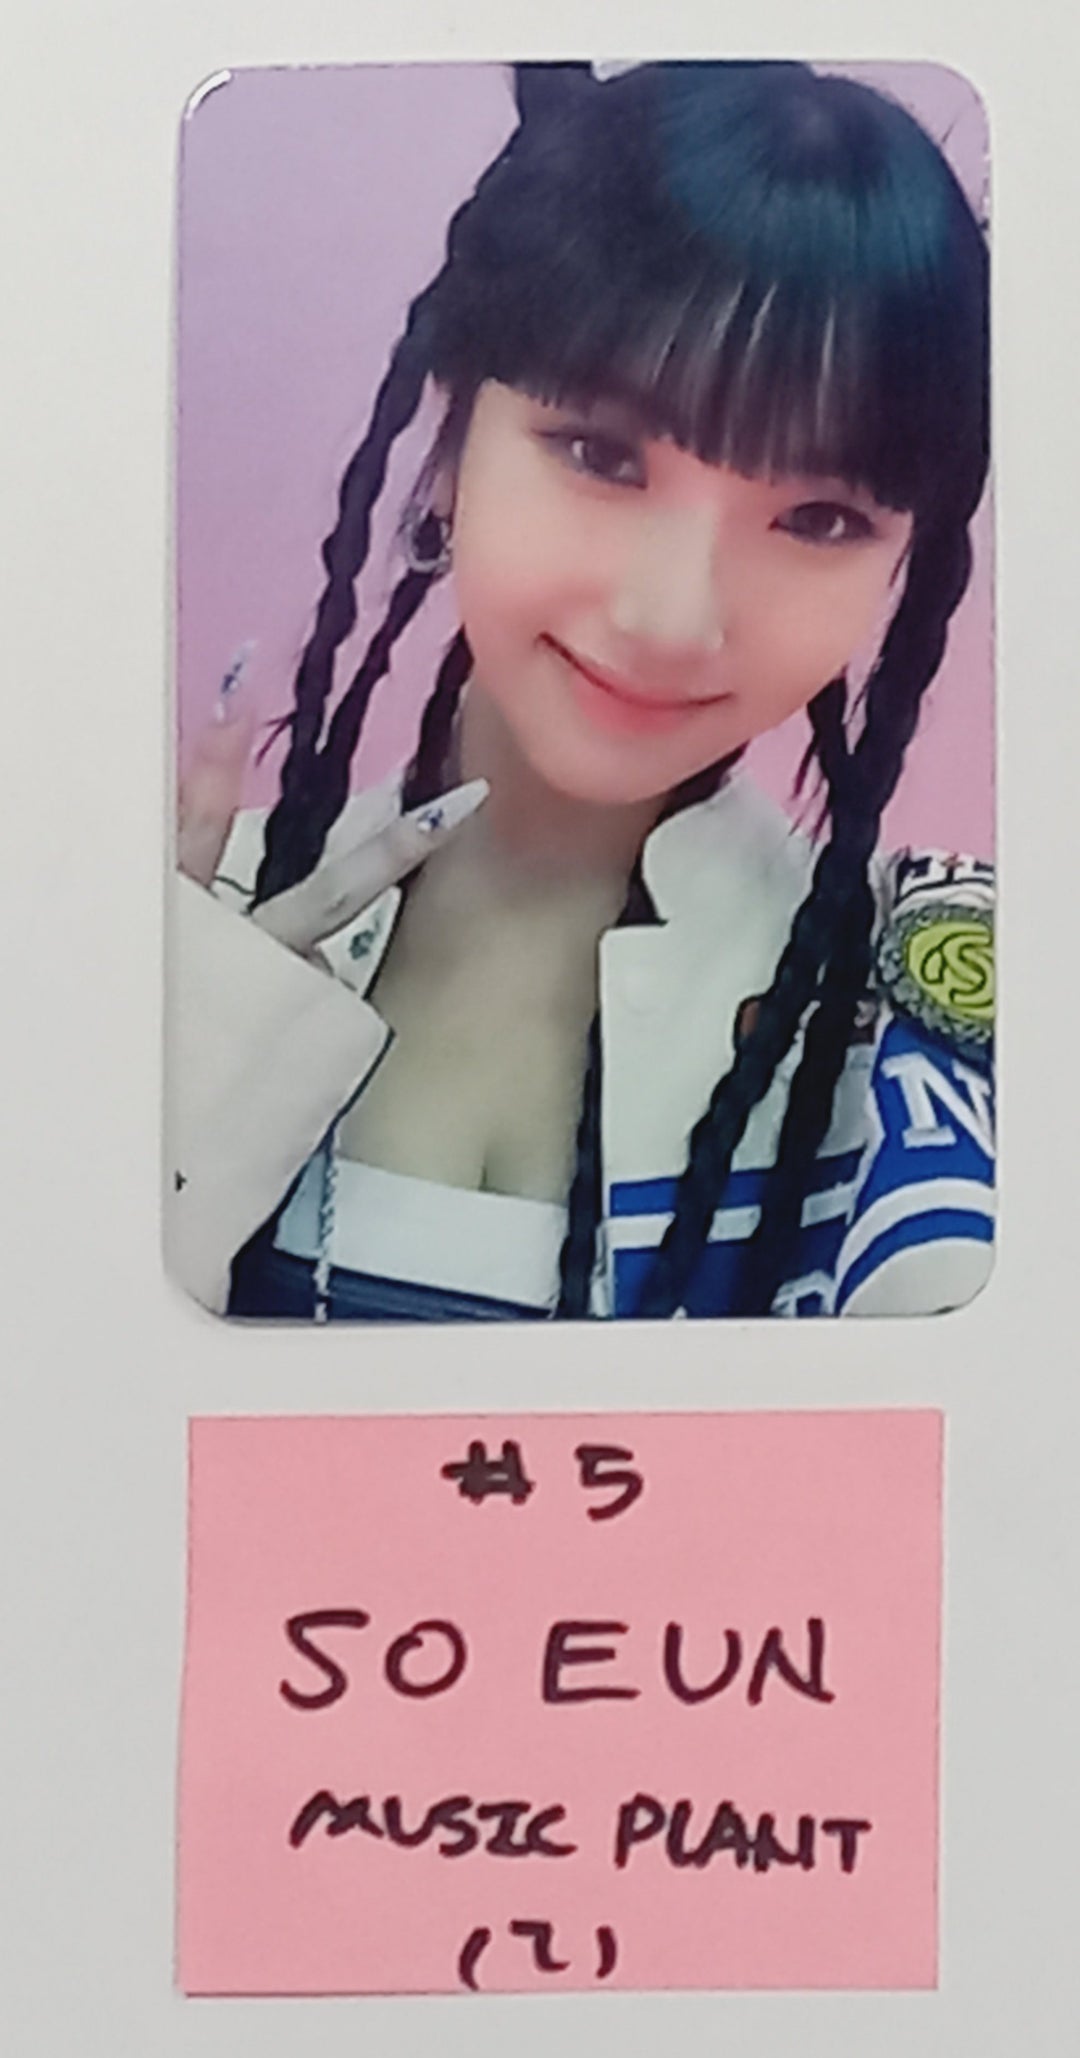 TRI.BE "Diamond" - Music Plant Fansign Event Photocard Round 2 [24.3.15]